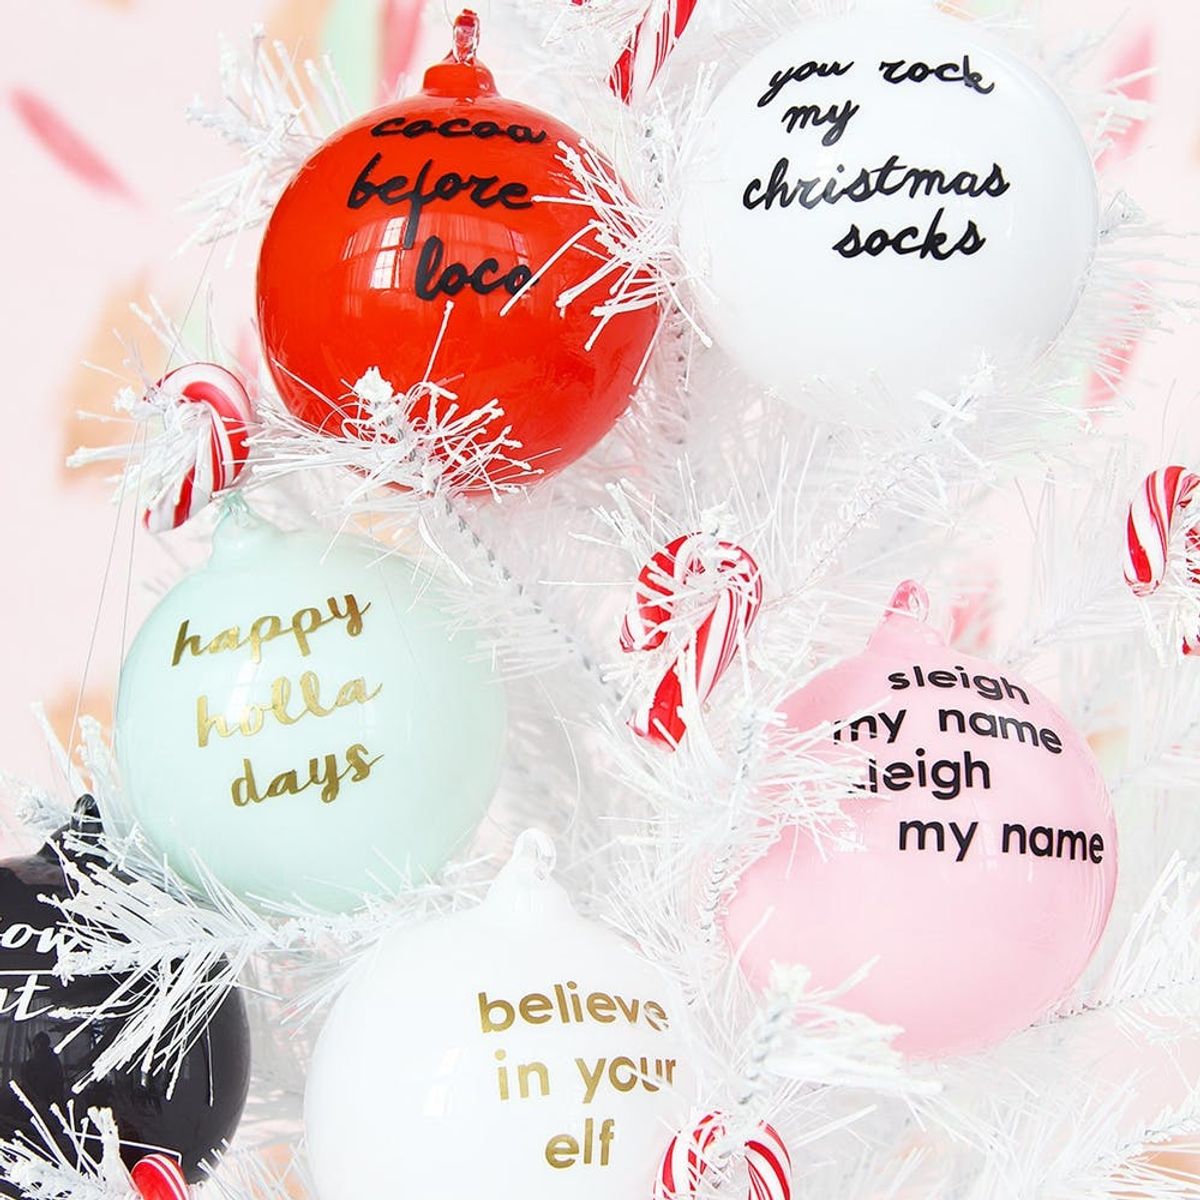 diy christmas ornaments for your tree inspired by puns